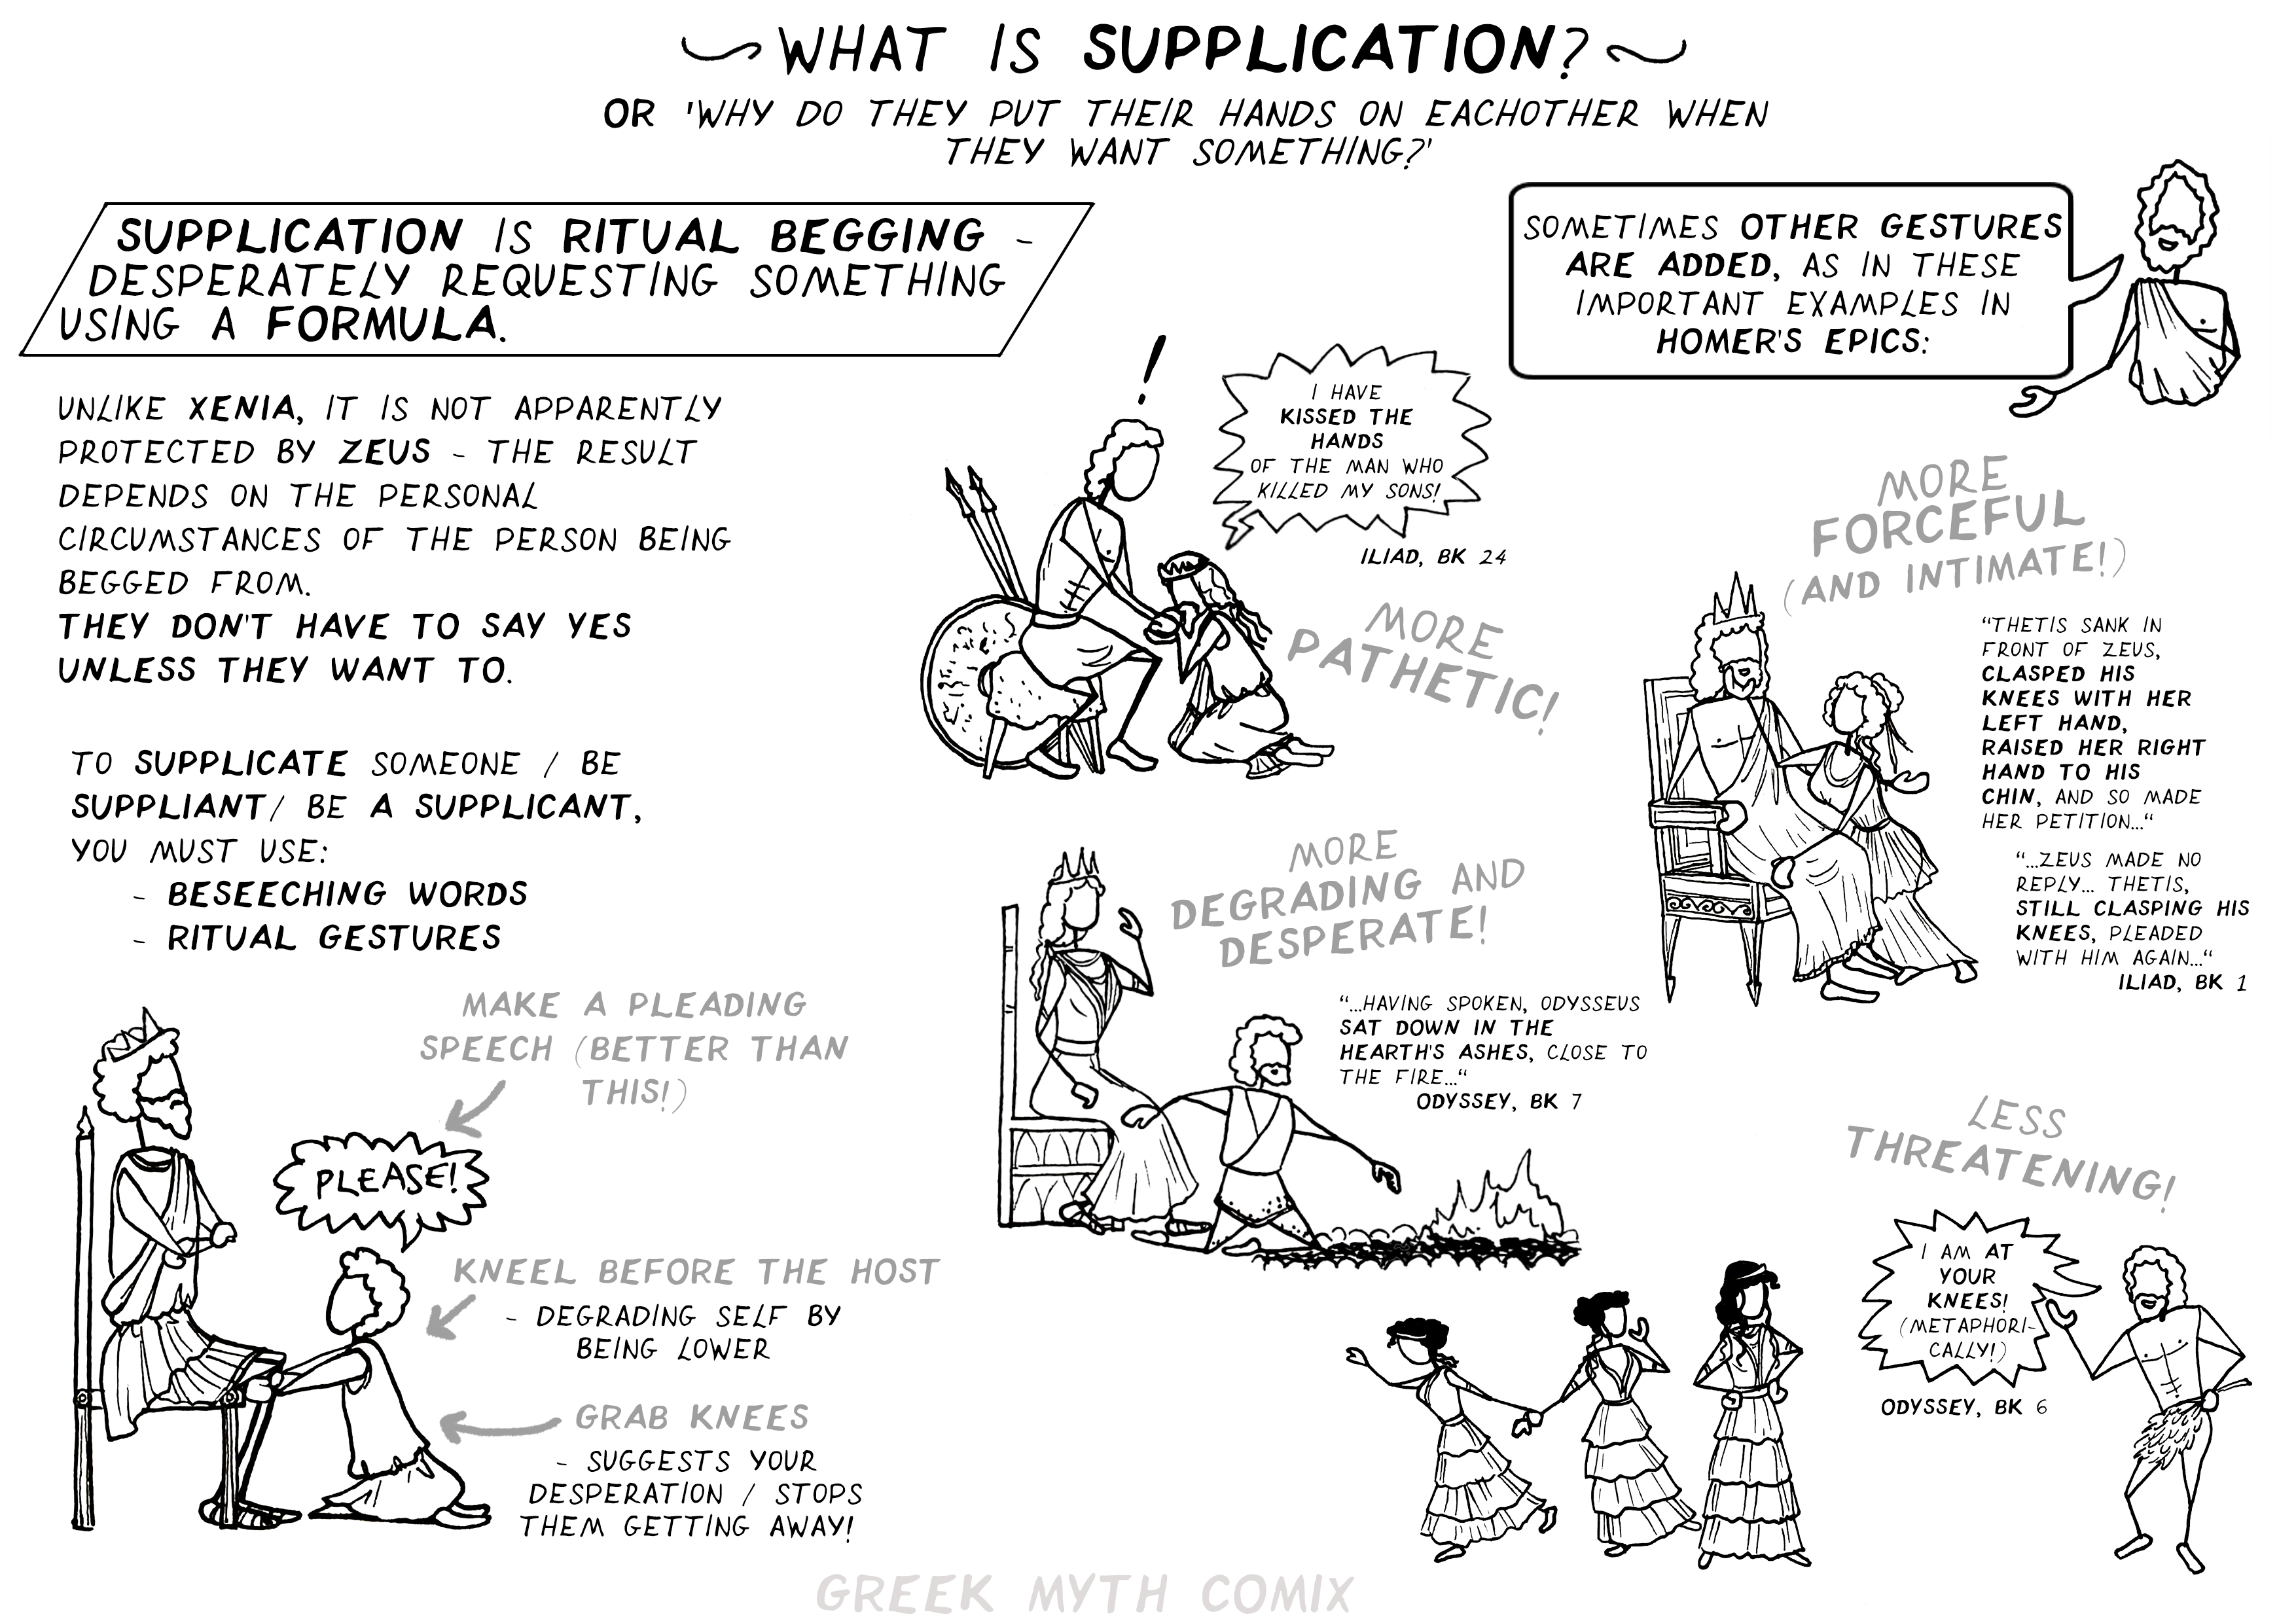 Stick-man comic with a lot of text, under the title "What is Supplication? or, 'why do they put their hands on eachother when they want something in Ancient Greek Epic?'". Text at the top left: Supplication is ritual begging -desperately requesting something using a formula. Beneath it, it says: "Unlike xenia, it is not apparently protected by Zeus -the result depends on the personal circumstances of the person being begged from". (in bald:) "They don't have to say yes unless they want to". Beneath, more text: "To supplicate someone / be suppliant / be a supplicant, you must: use: - Beseeching words - Ritual gestures.". The text accompanied by the image of a stick-person on their knees, saying "please" to a king sitting in a throne. The captions says: Make a pleading speech (better than this!), kneel before the host - degrading self by being lower, grab knees - suggests your desperation / stops them getting away. On the top right, there is a stick man saying: "Sometimes, other gestures are added, as in these important examples in Homer's epics". This is followed by a series of drawings of those epics, with captions. Iliad, BK 24: woman kneeling and kissing warrior's hand, there's an excalation sign on top of his head. She says: "I have kissed the hands of the man who killed my sons". Underneath, the caption says: "More pathetic!". Iliad, BK 1: woman in a position ressembling kneeling, but not quite it, standing very close to a king on a throne, grabbing his leg with one hand, and his face with the other. The caption says: "More forceful (and intimate!). The quotation from the text says: "Thetis sank in front of Zeus, clasped his knees with her left hand, raised her right hand to his chin, and so made her petition..." "Zeus made no reply... Thetis, still clasping his knees, pleaded with him, again...". Odyssey, BK 7. The caption says: "More degrading and desperate". Drawing of a man kneeling between a queen sitting on a throne, and a pyre of fire. The quotation says: "Having spoken, Odysseus sat down in the hearth's ashes, close to the fire". Lastly, Odyssey, BK 6. There is a group of three women standing in line before a naked man. The first woman faces him, standing her ground firmly, the last one is moving away, taking the one in the middle with her. The man says: "I am at your knees" (metaphorically). The caption says: "Less threatening!"